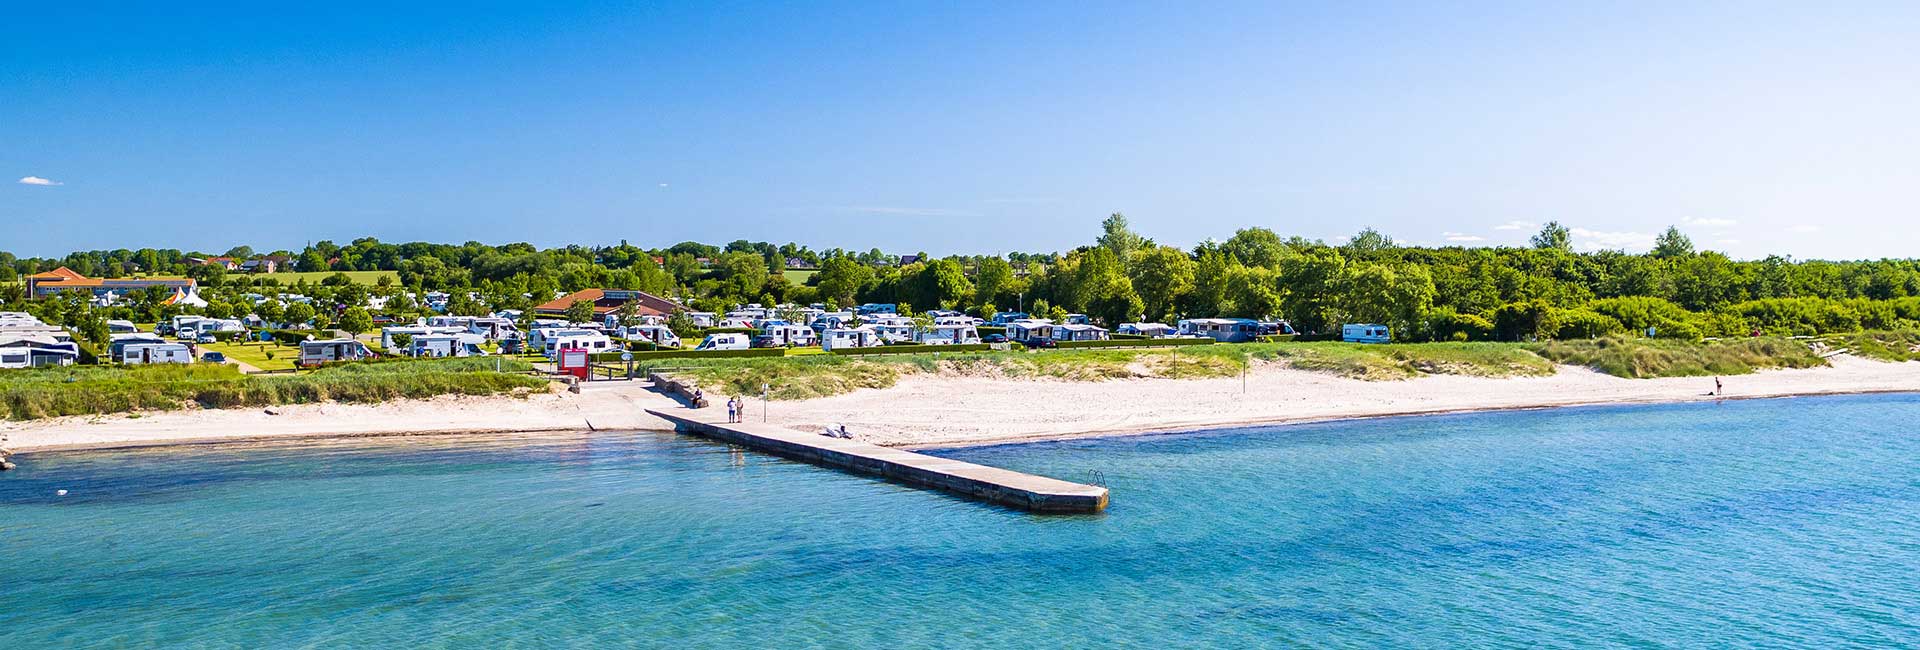 Camping Fehmarn Ostsee